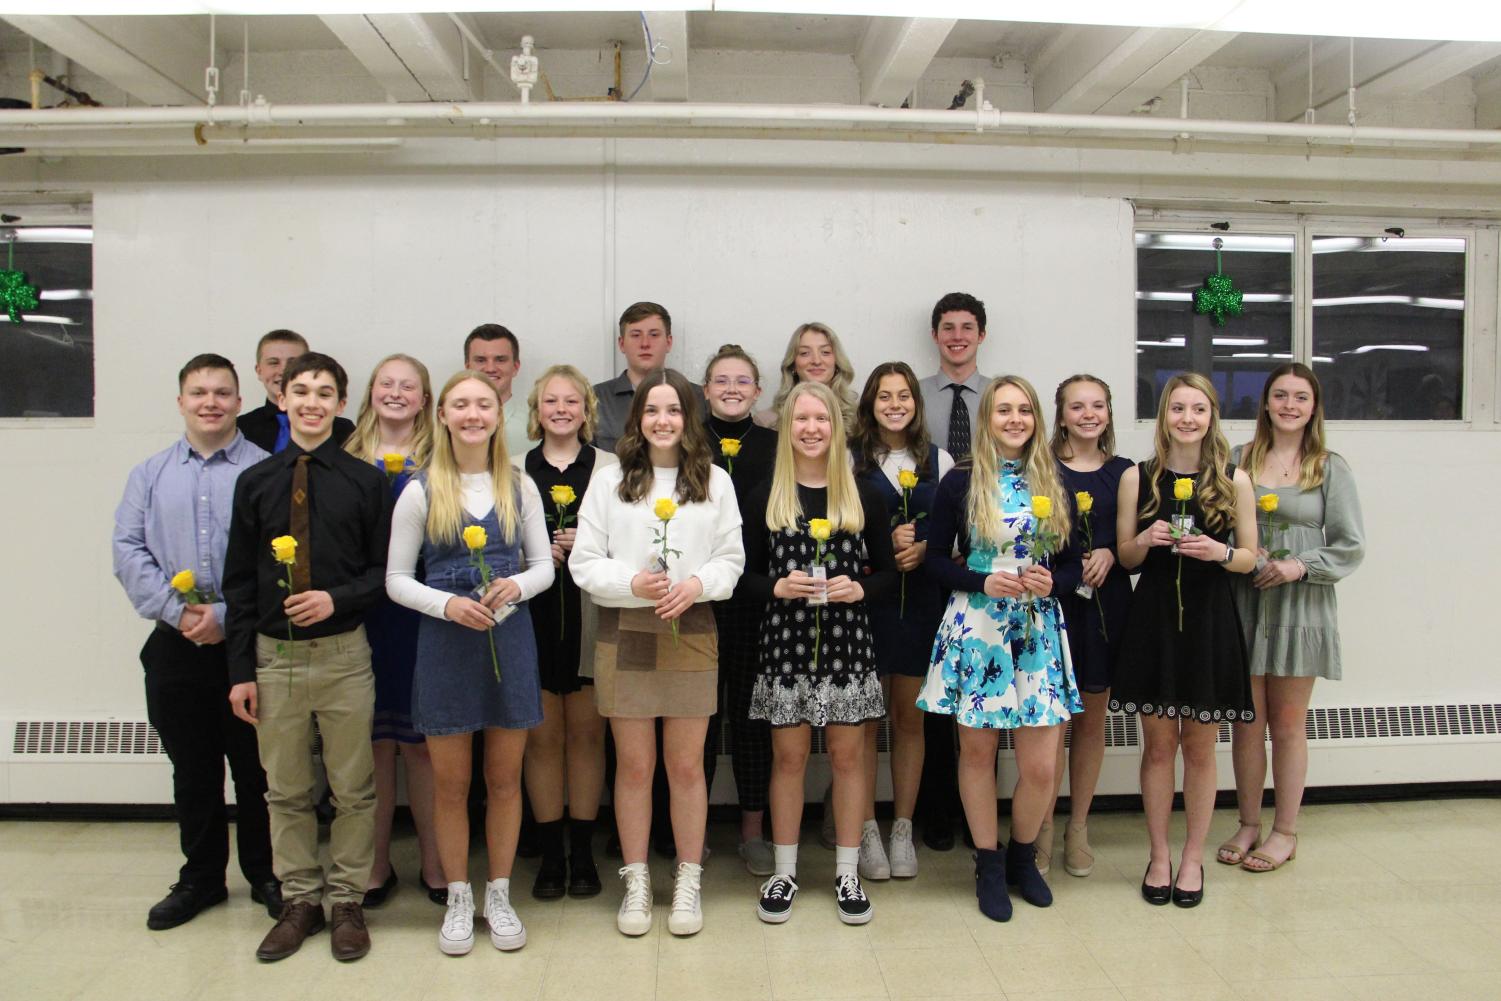 The newly inducted National Honor Society members hold their yellow roses and NHS pins after the induction ceremony. Students were inducted on March 14, in the GHS cafeteria. These high achieving students showed characteristics of leadership, service, good character, and academic success. “As a prior member, I am so excited to have so many new members get inducted and I am so proud of all of them,” said member Julia Townsend ‘23. 